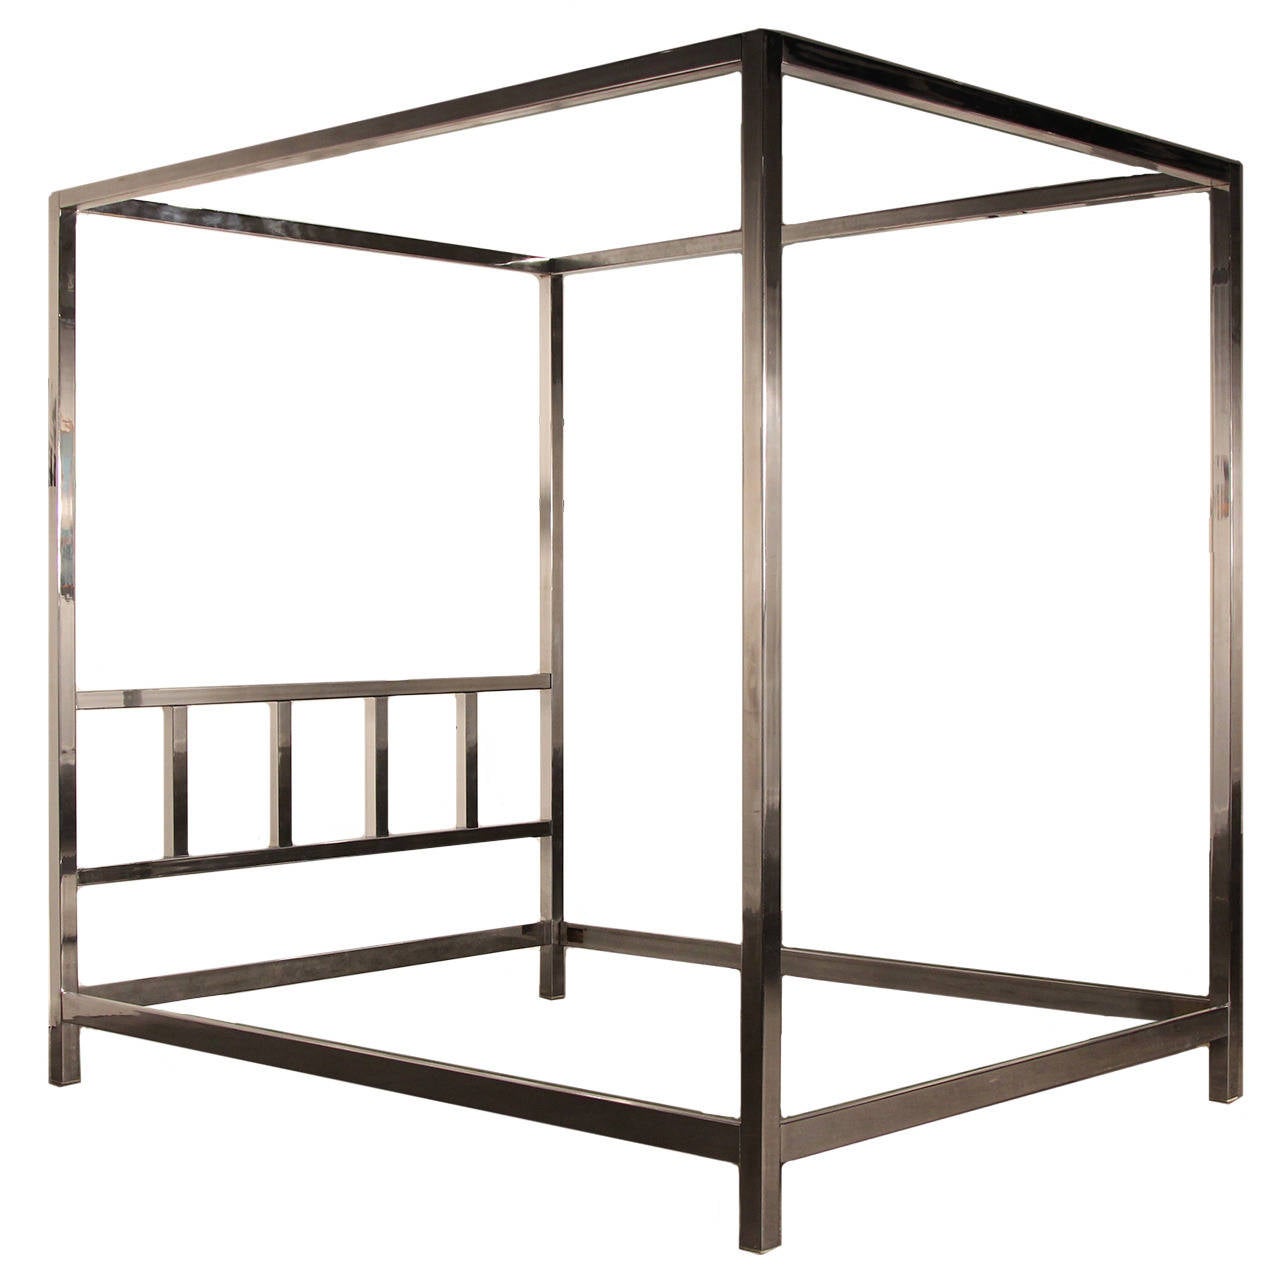 Incredible chrome canopy bed. Truly a statement piece in the master bedroom. Clean chrome lines and geometric shape. Fits queen size bed.